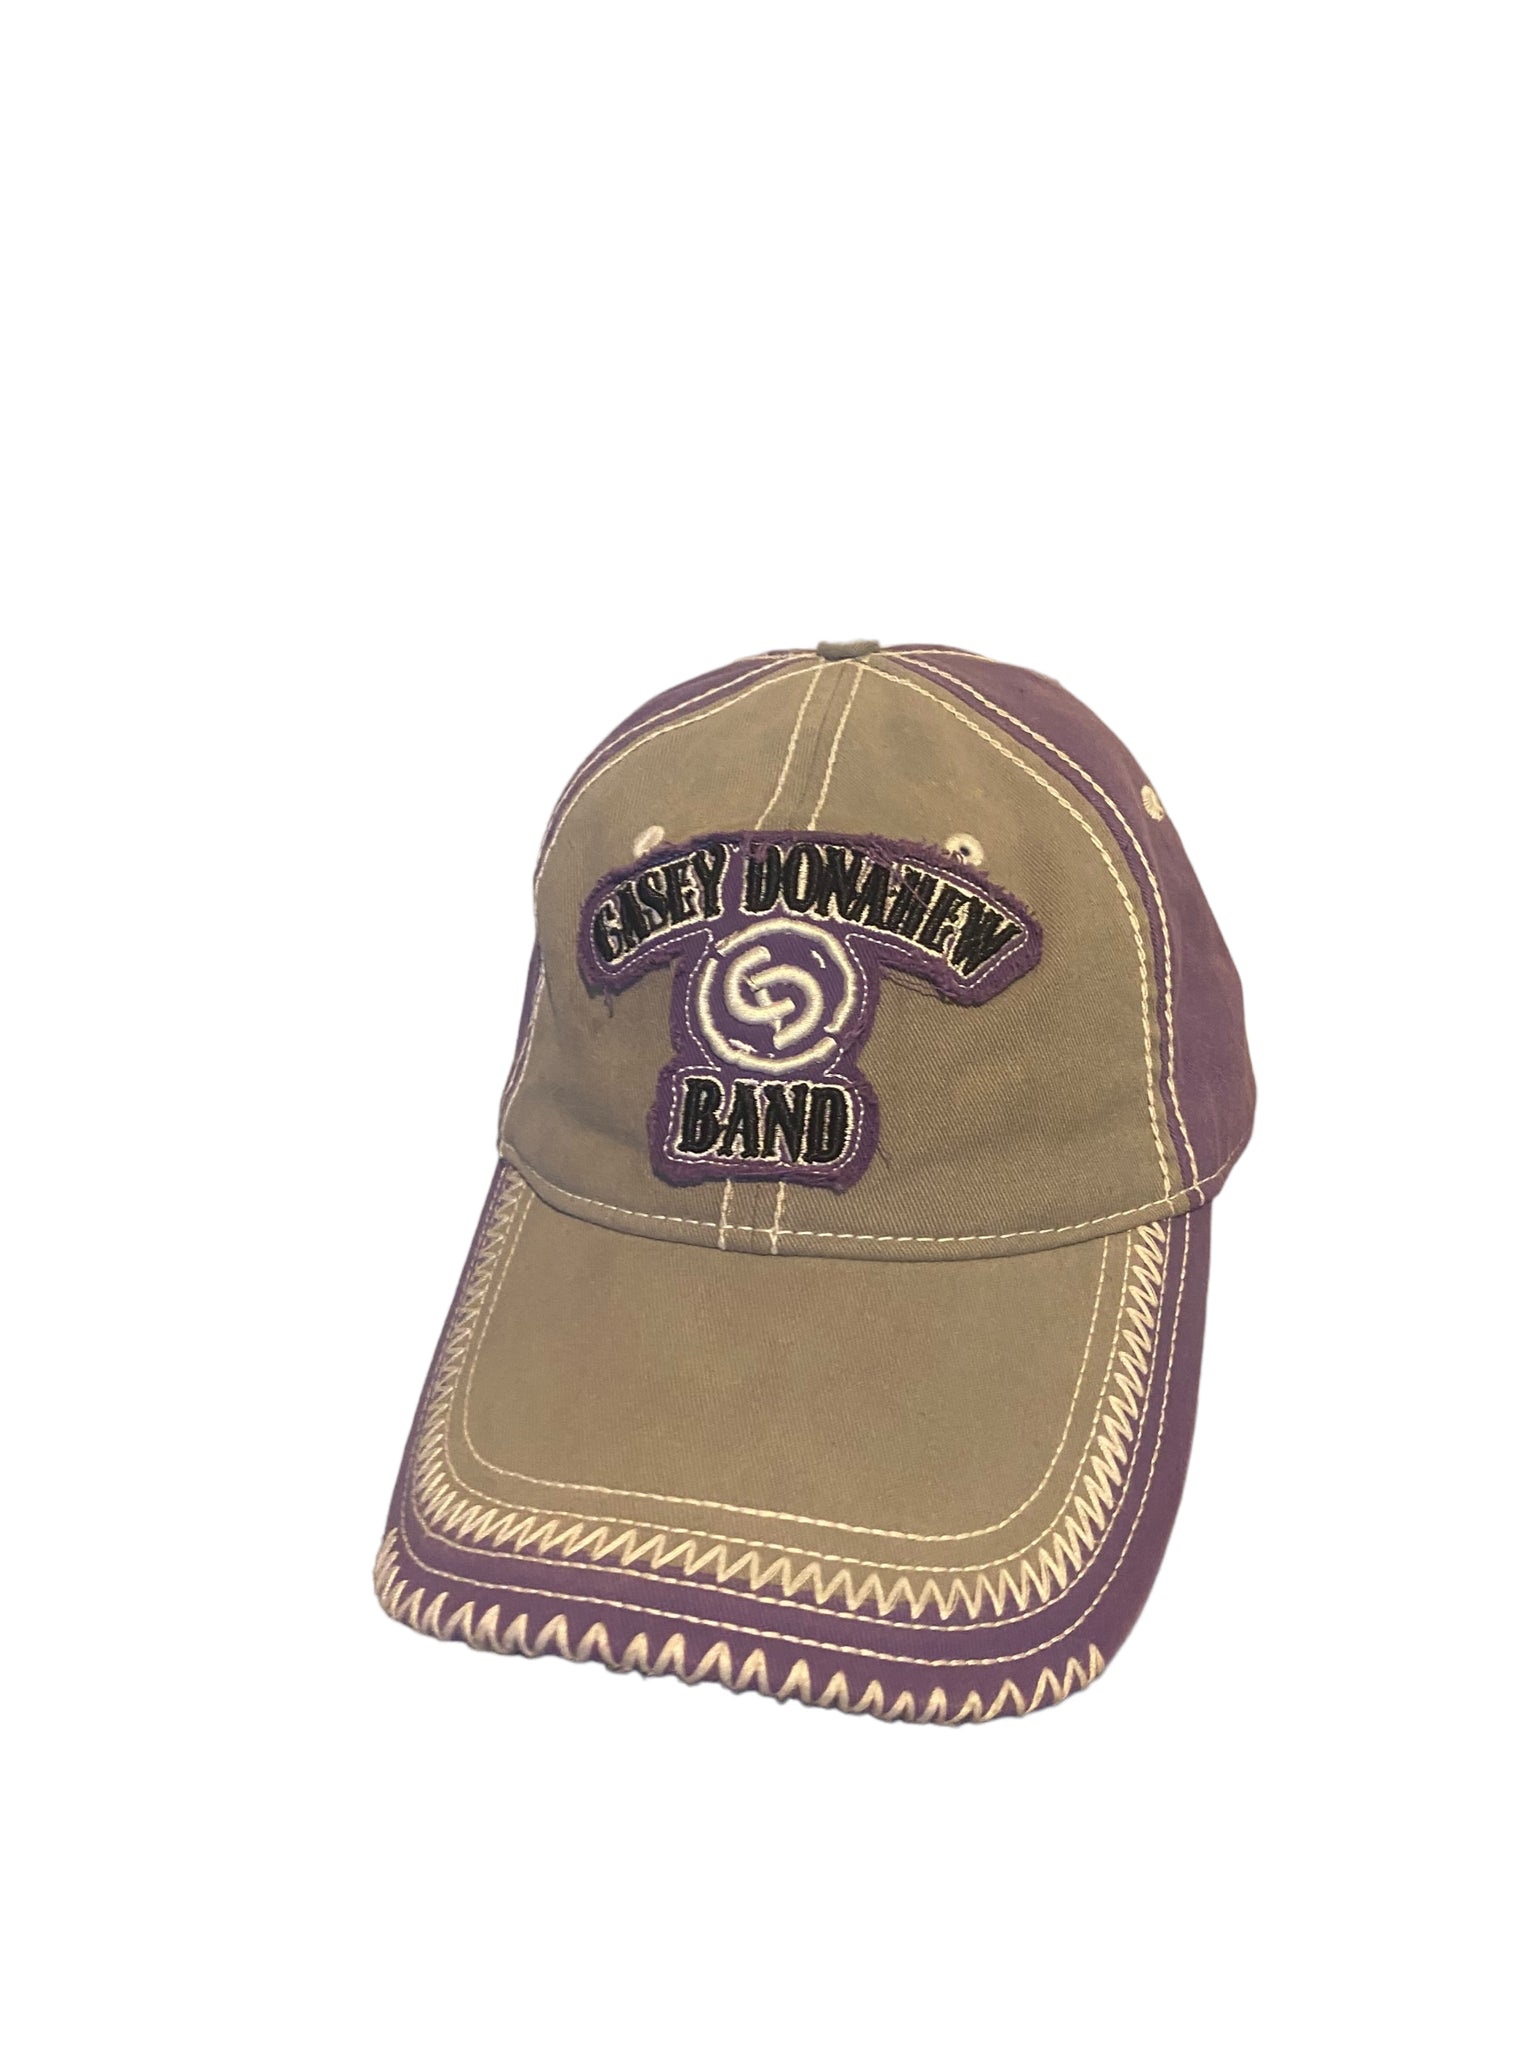 casey donahew band embroidered patch snapback hat gray and purple